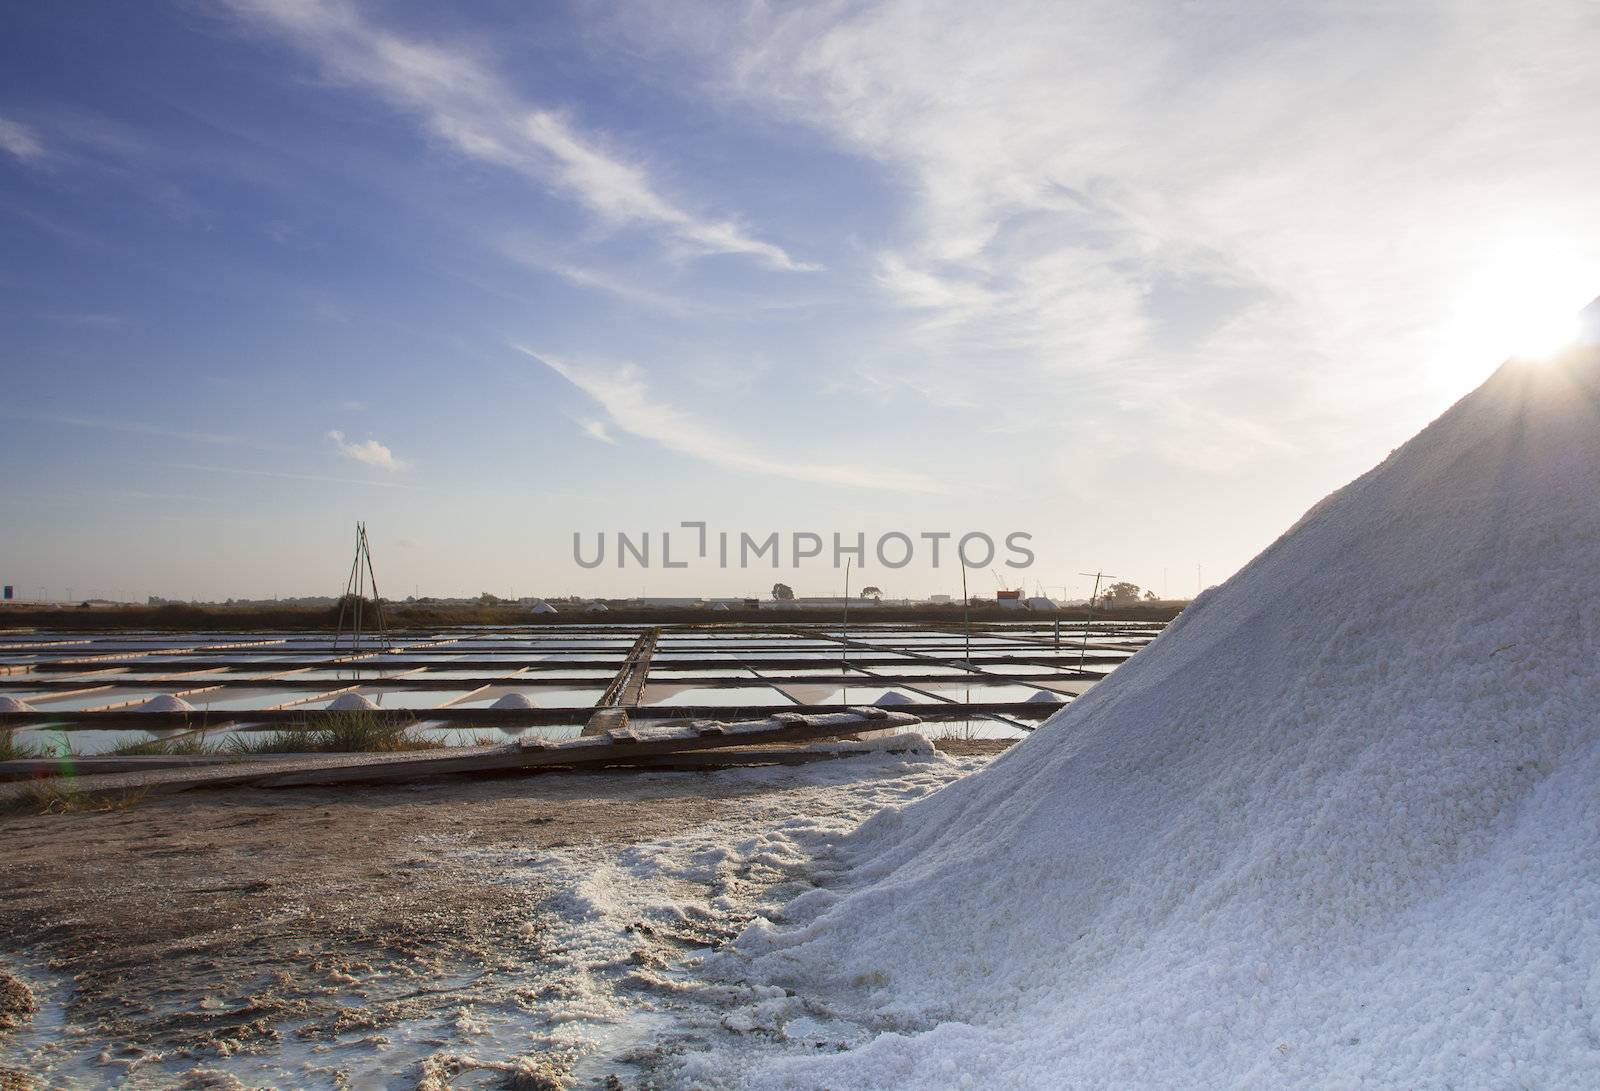 Salt industry in the city of Aveiro - Portugal